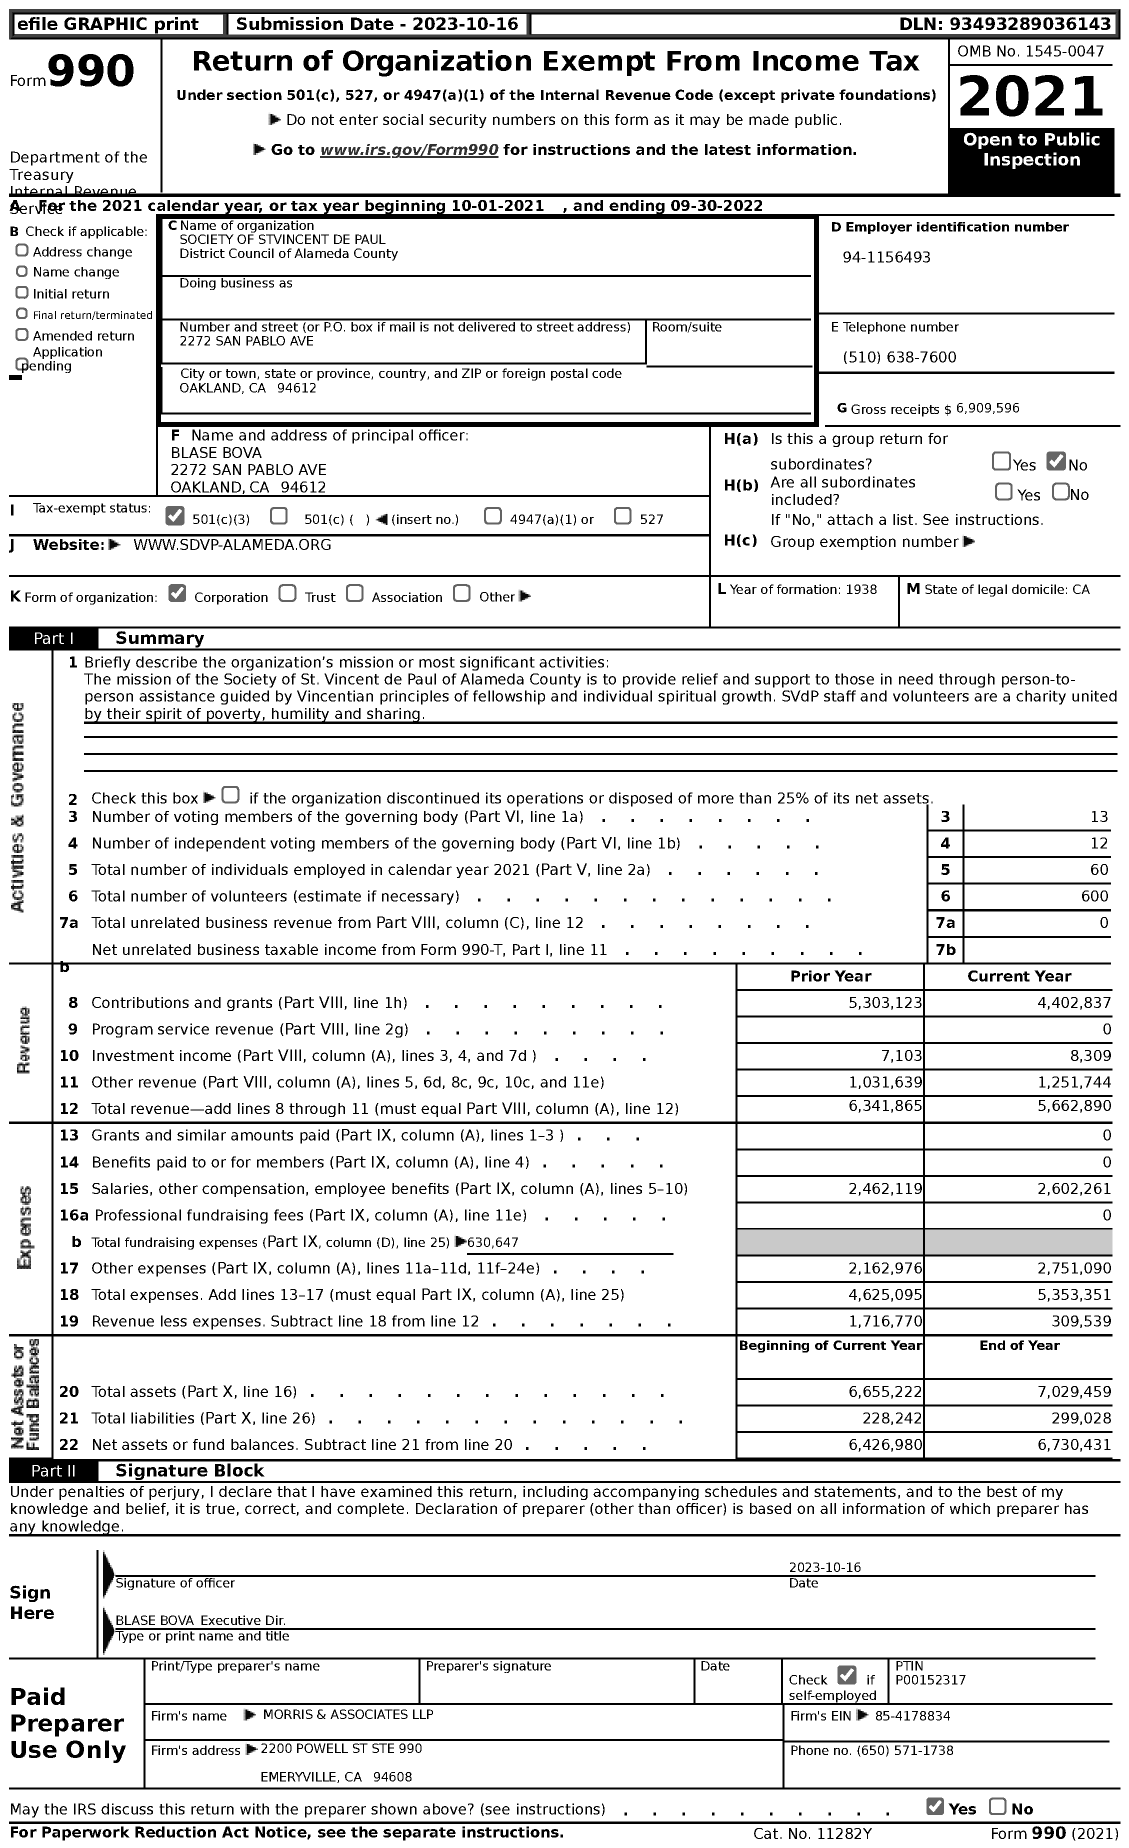 Image of first page of 2021 Form 990 for SOCIETY of STVINCENT de PAUL District Council of Alameda County